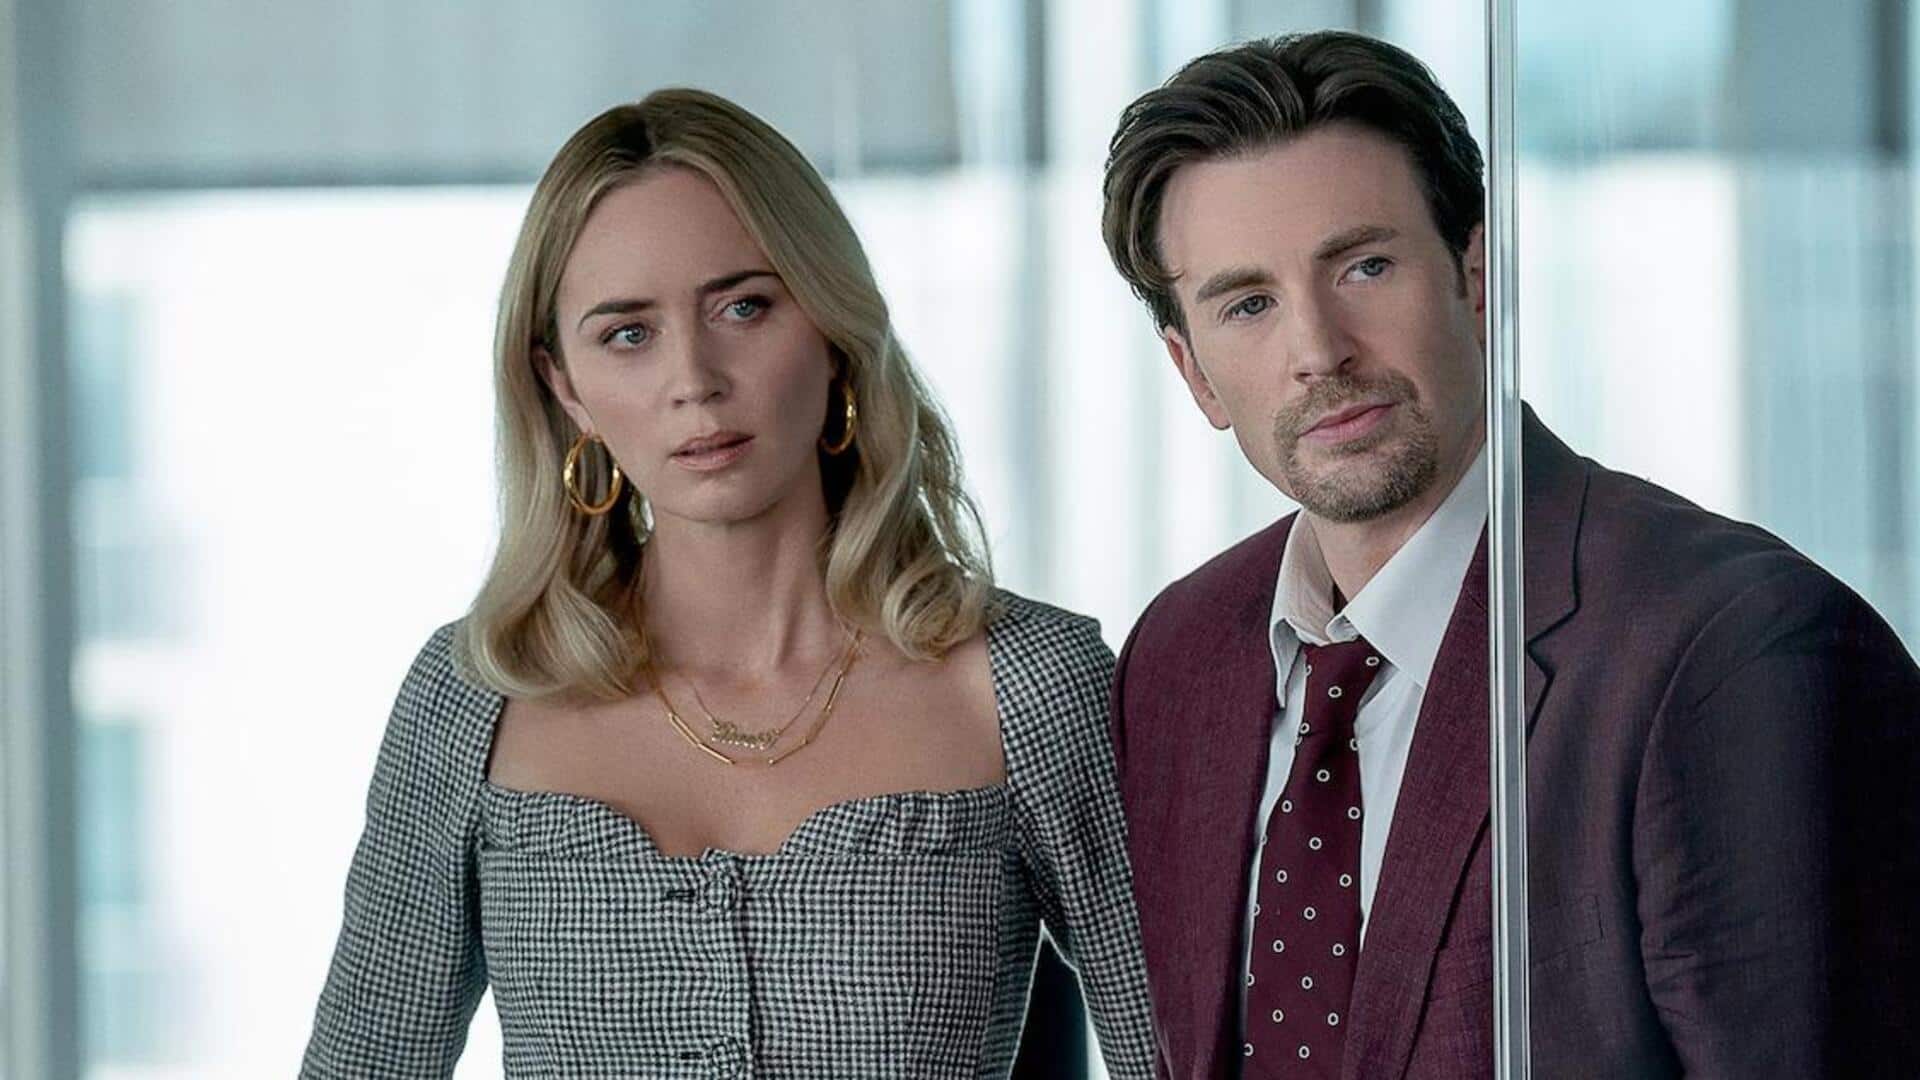 'Pain Hustlers': Everything about Chris Evans, Emily Blunt's crime drama